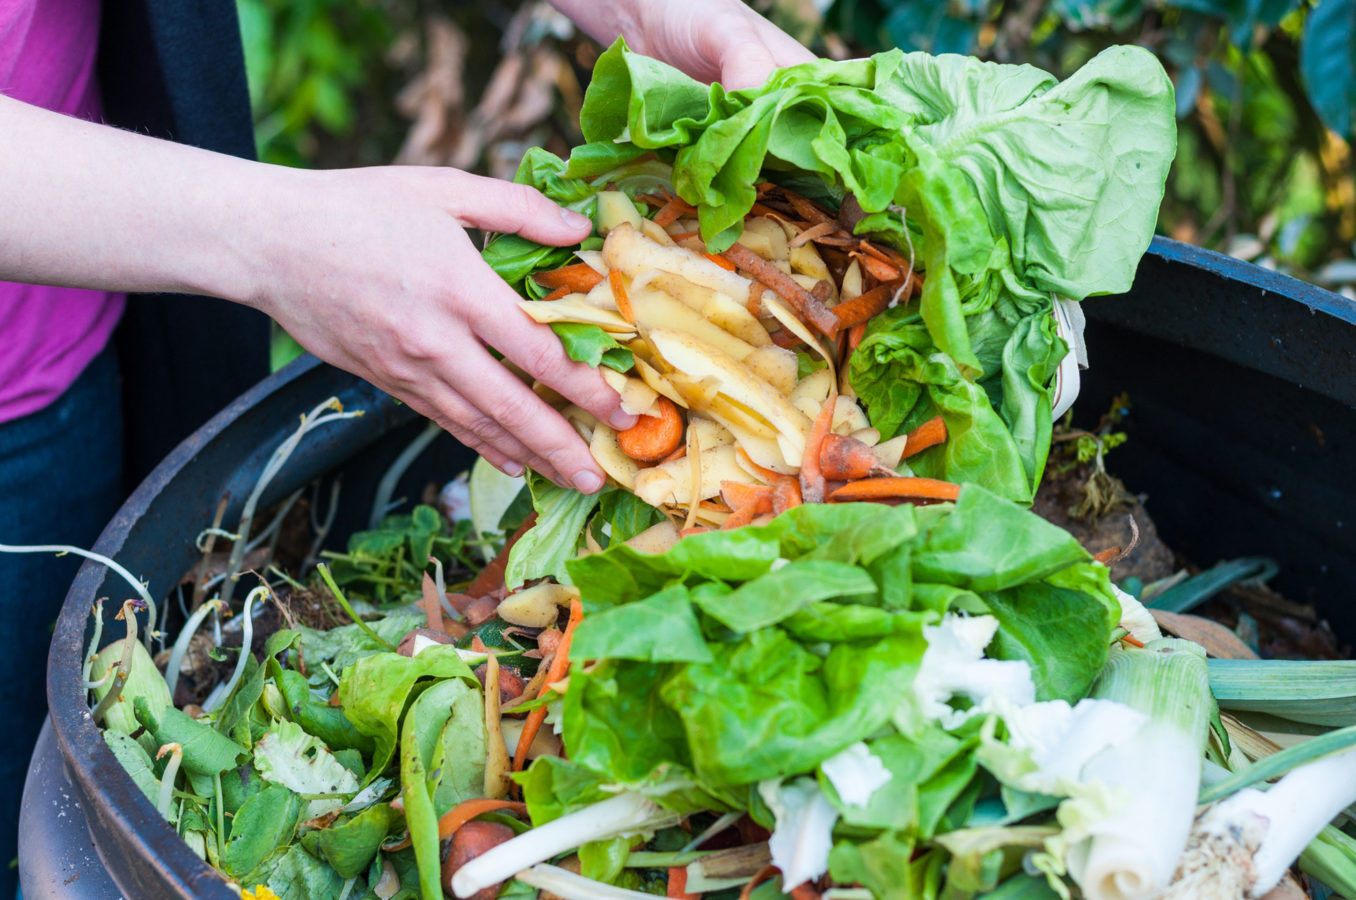 From Seoul to Dubai, some of the world’s initiatives for cutting food waste